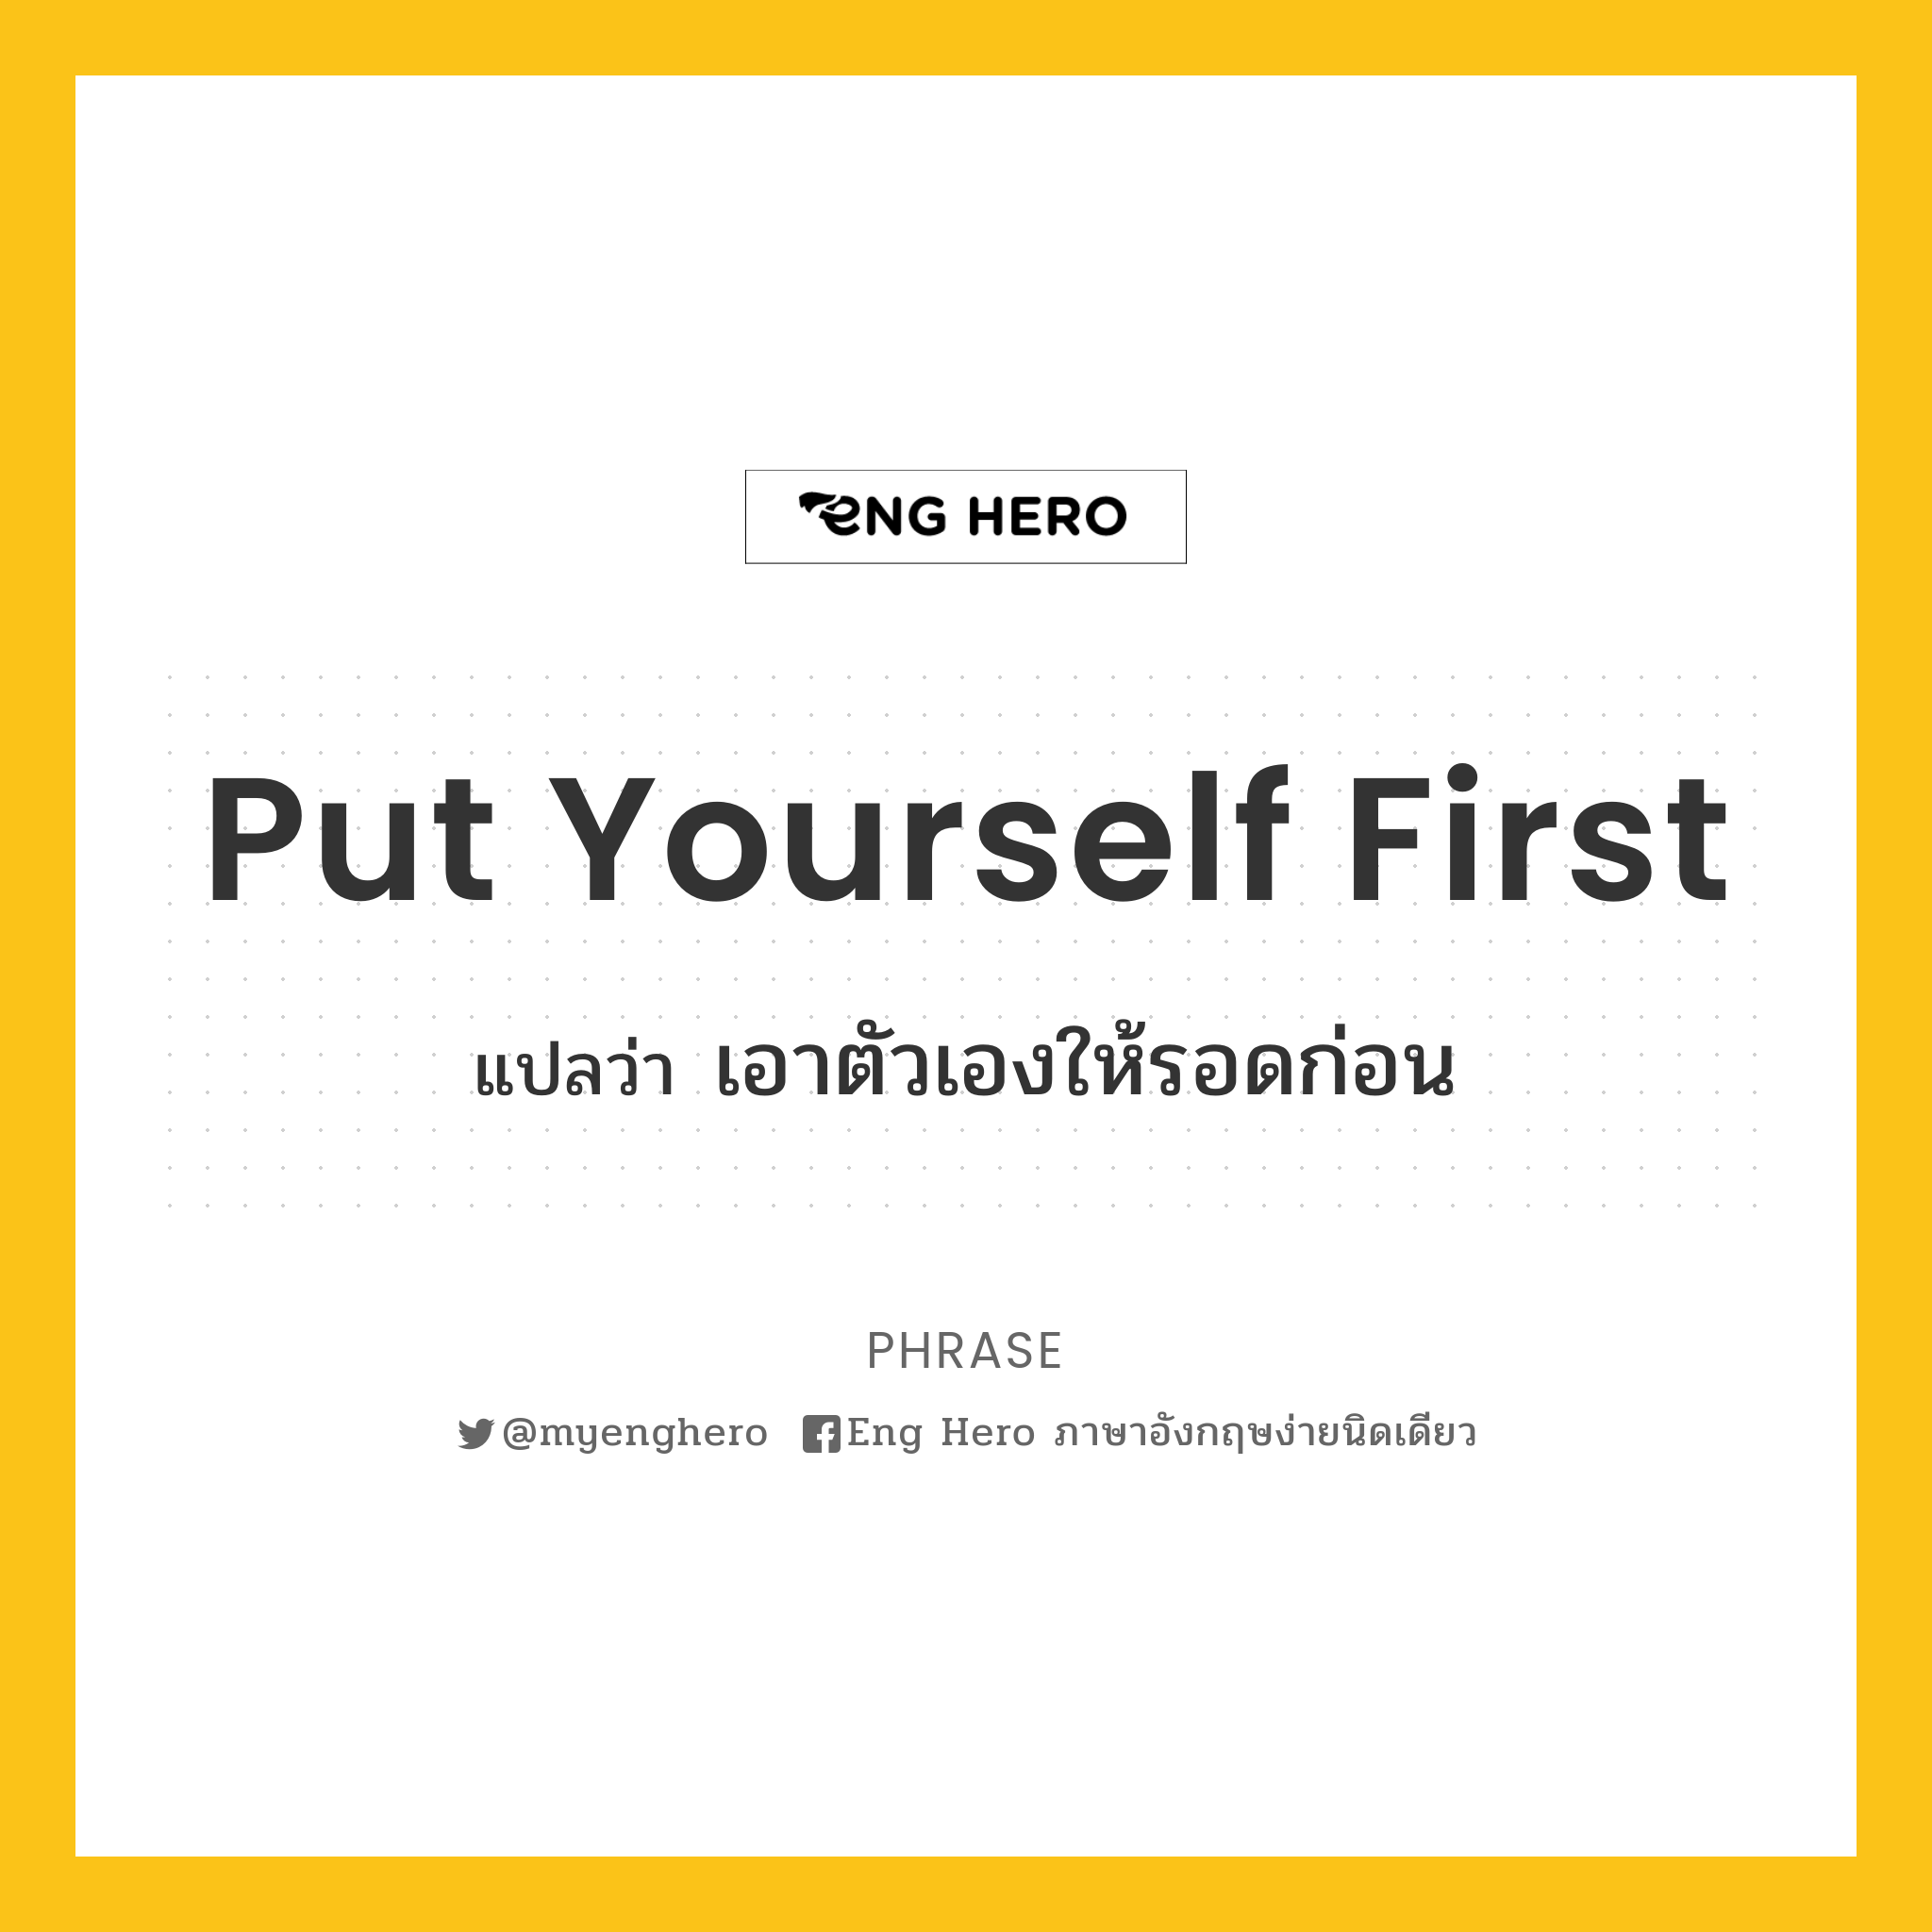 Put yourself first